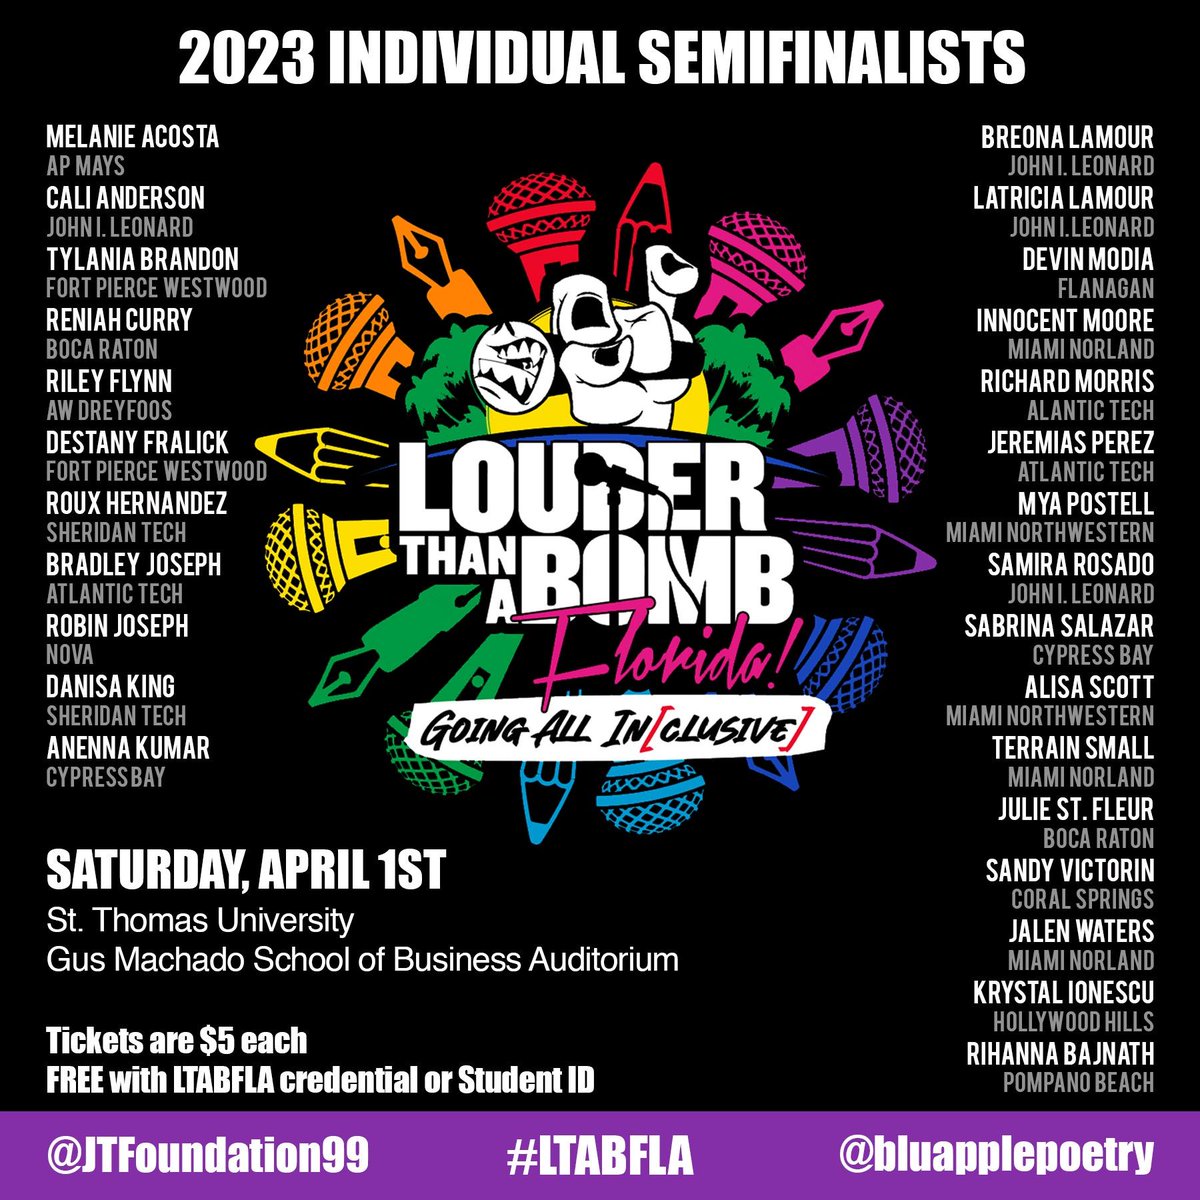 Congratulations to the Indy Semifinalists for this year's #LTABFLA competition. Be sure to support your crew on April 1st and shout them out in the comments.